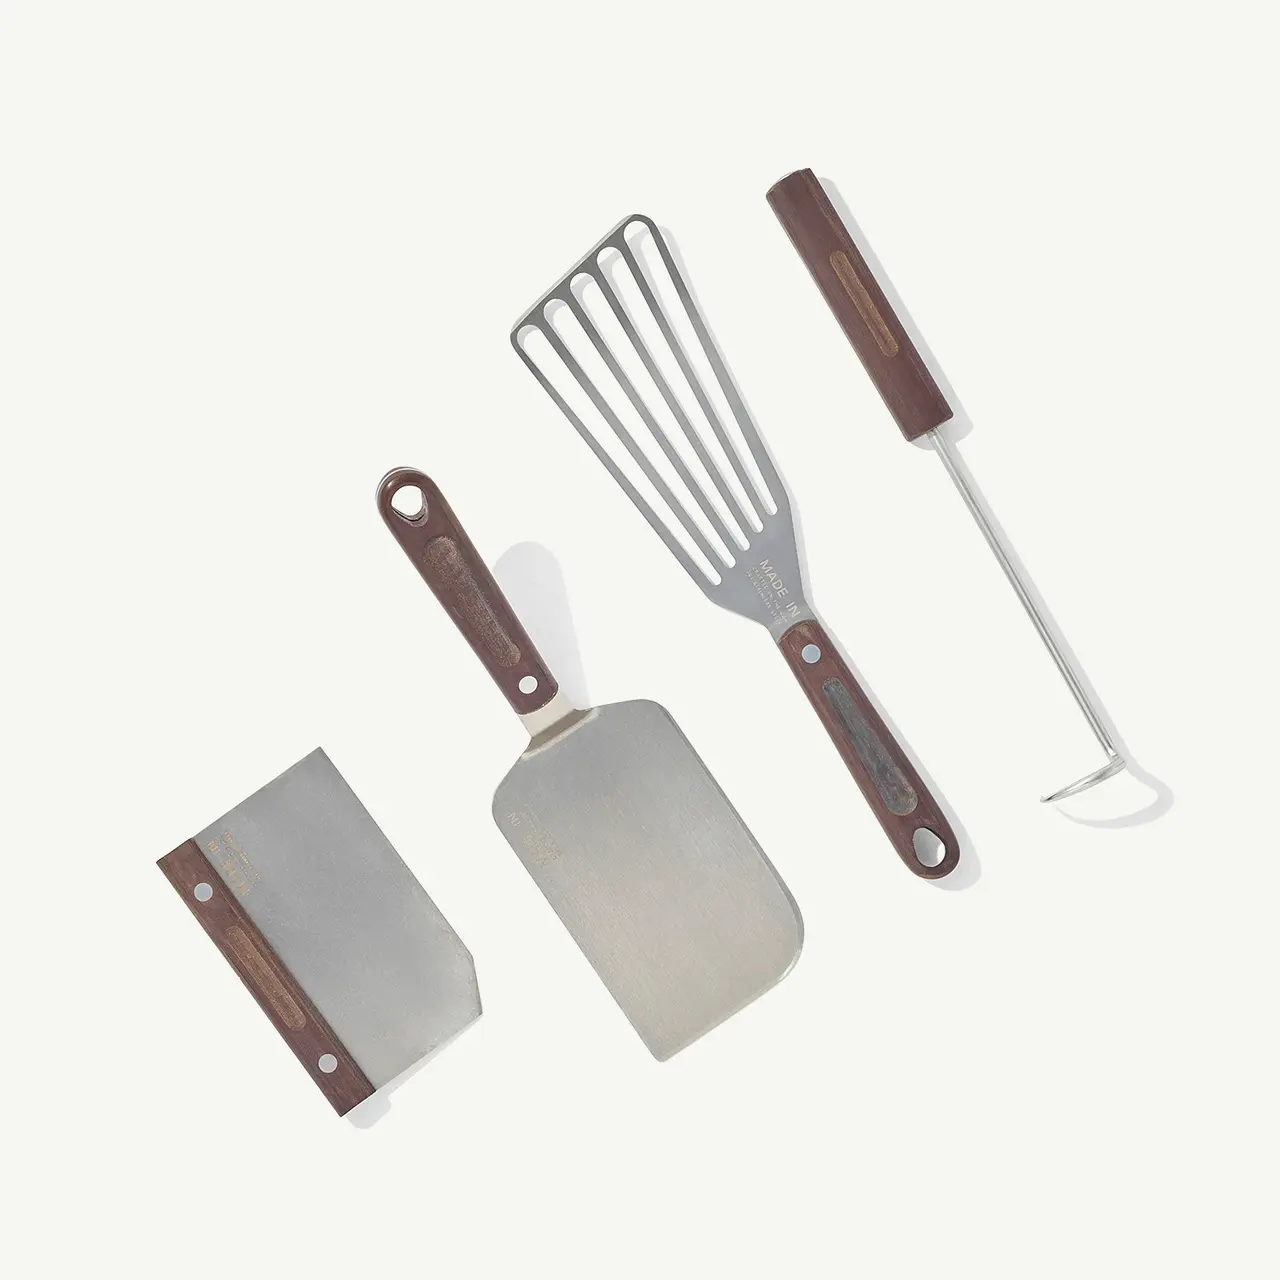 A set of three kitchen utensils with wooden handles, including a spatula, flipper, and fork on a plain background.